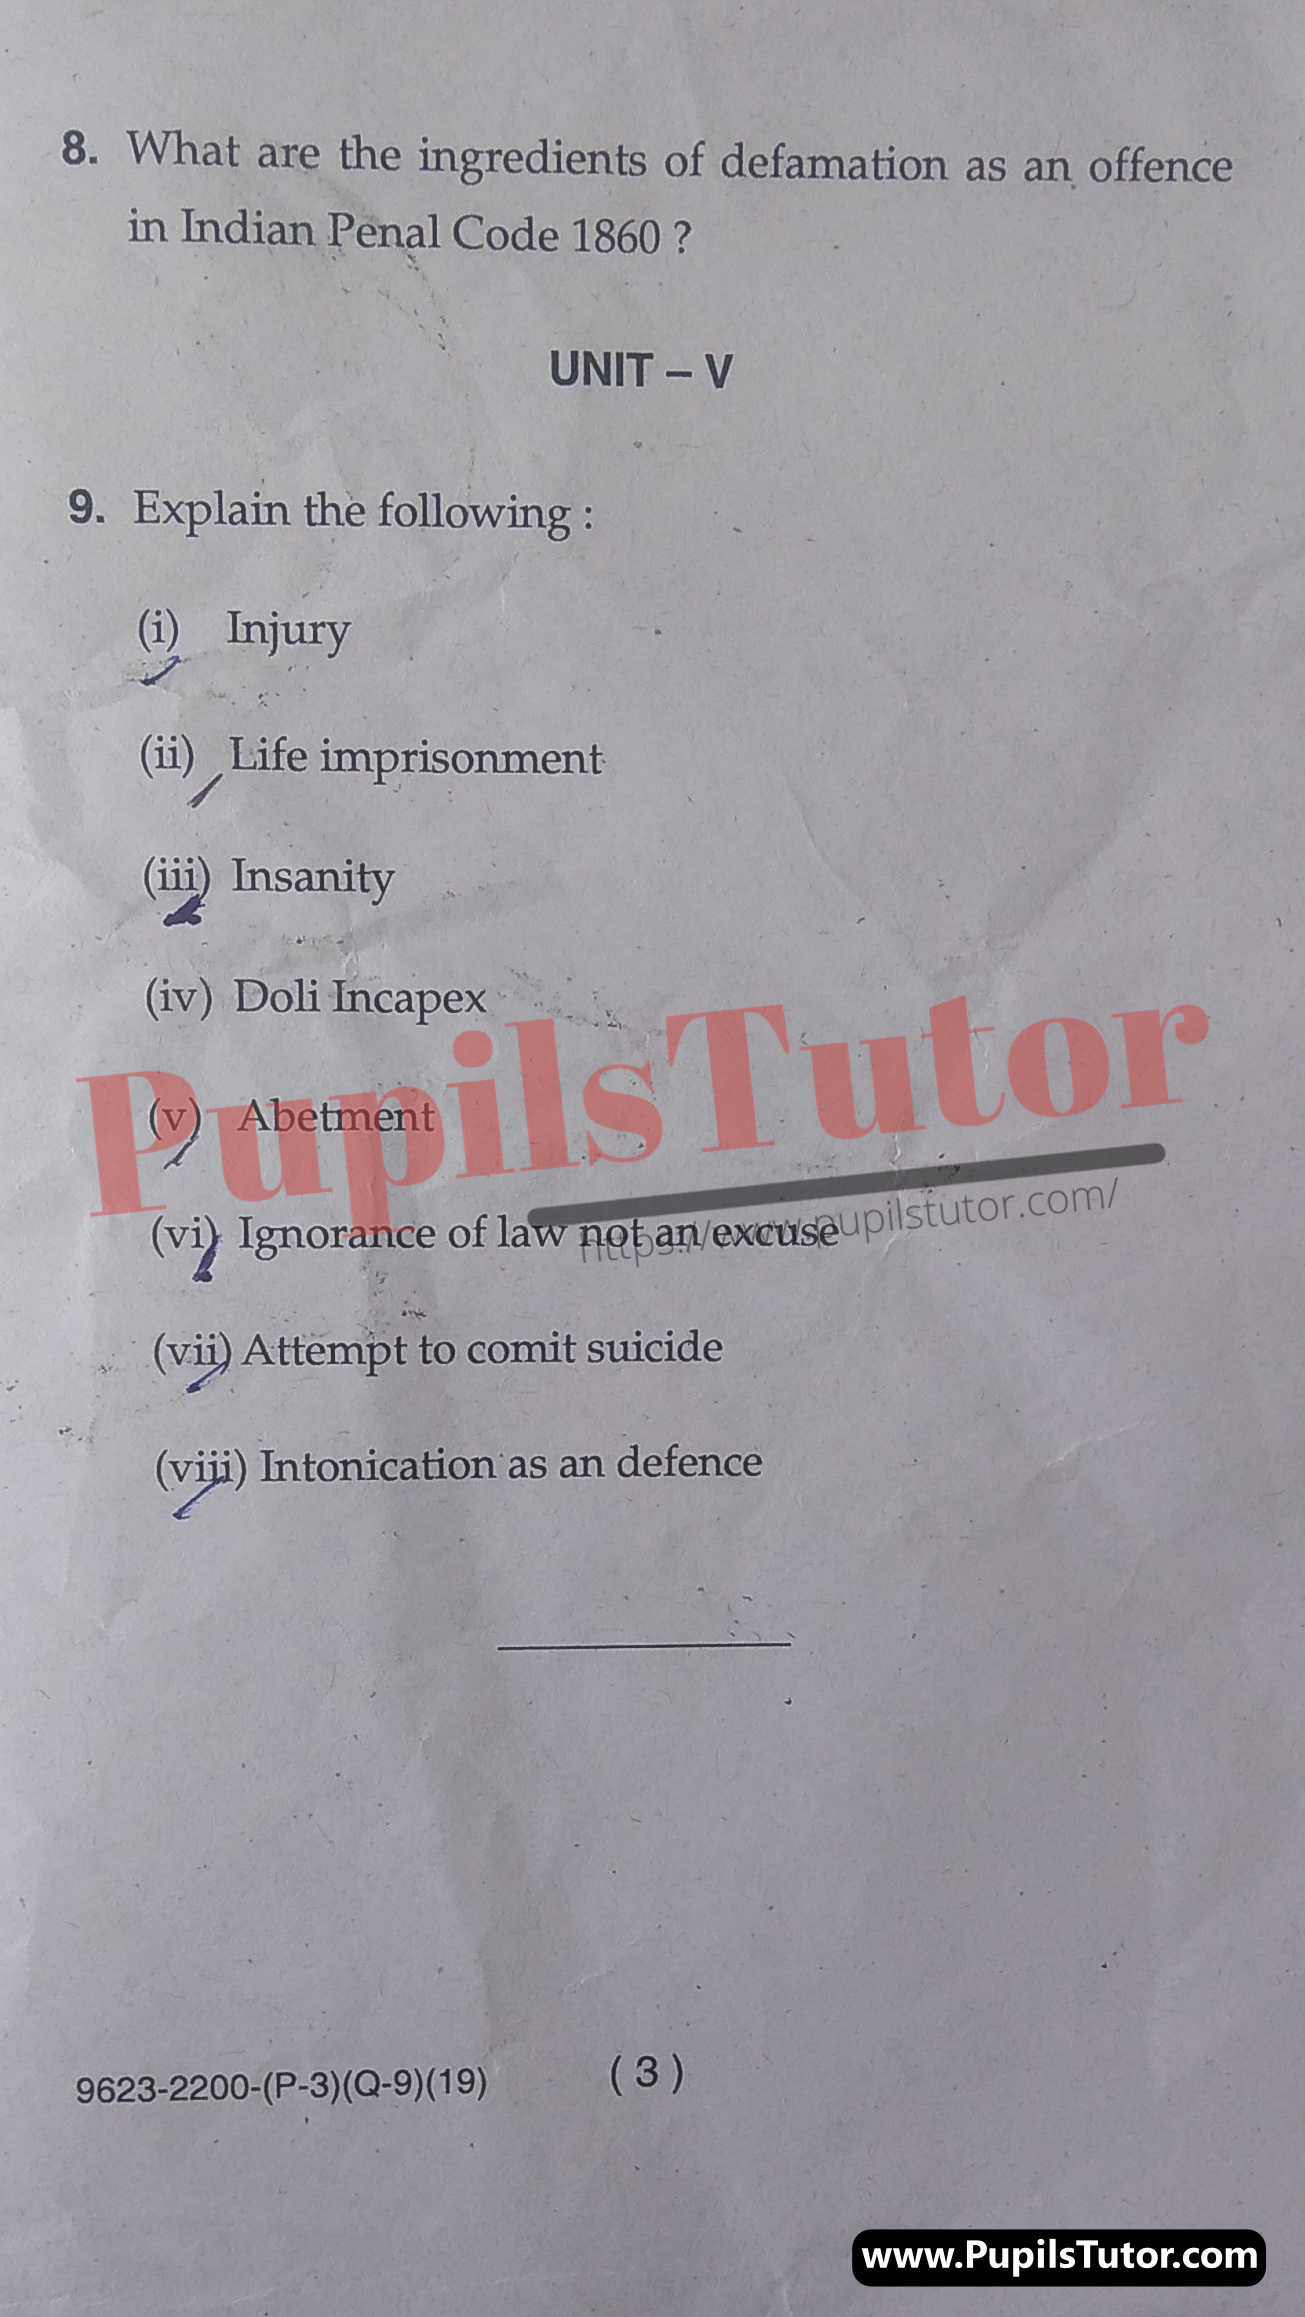 Free Download PDF Of M.D. University B.A. LL.B. Fifth Semester Latest Question Paper For Law Of Crimes Subject (Page 3) - https://www.pupilstutor.com